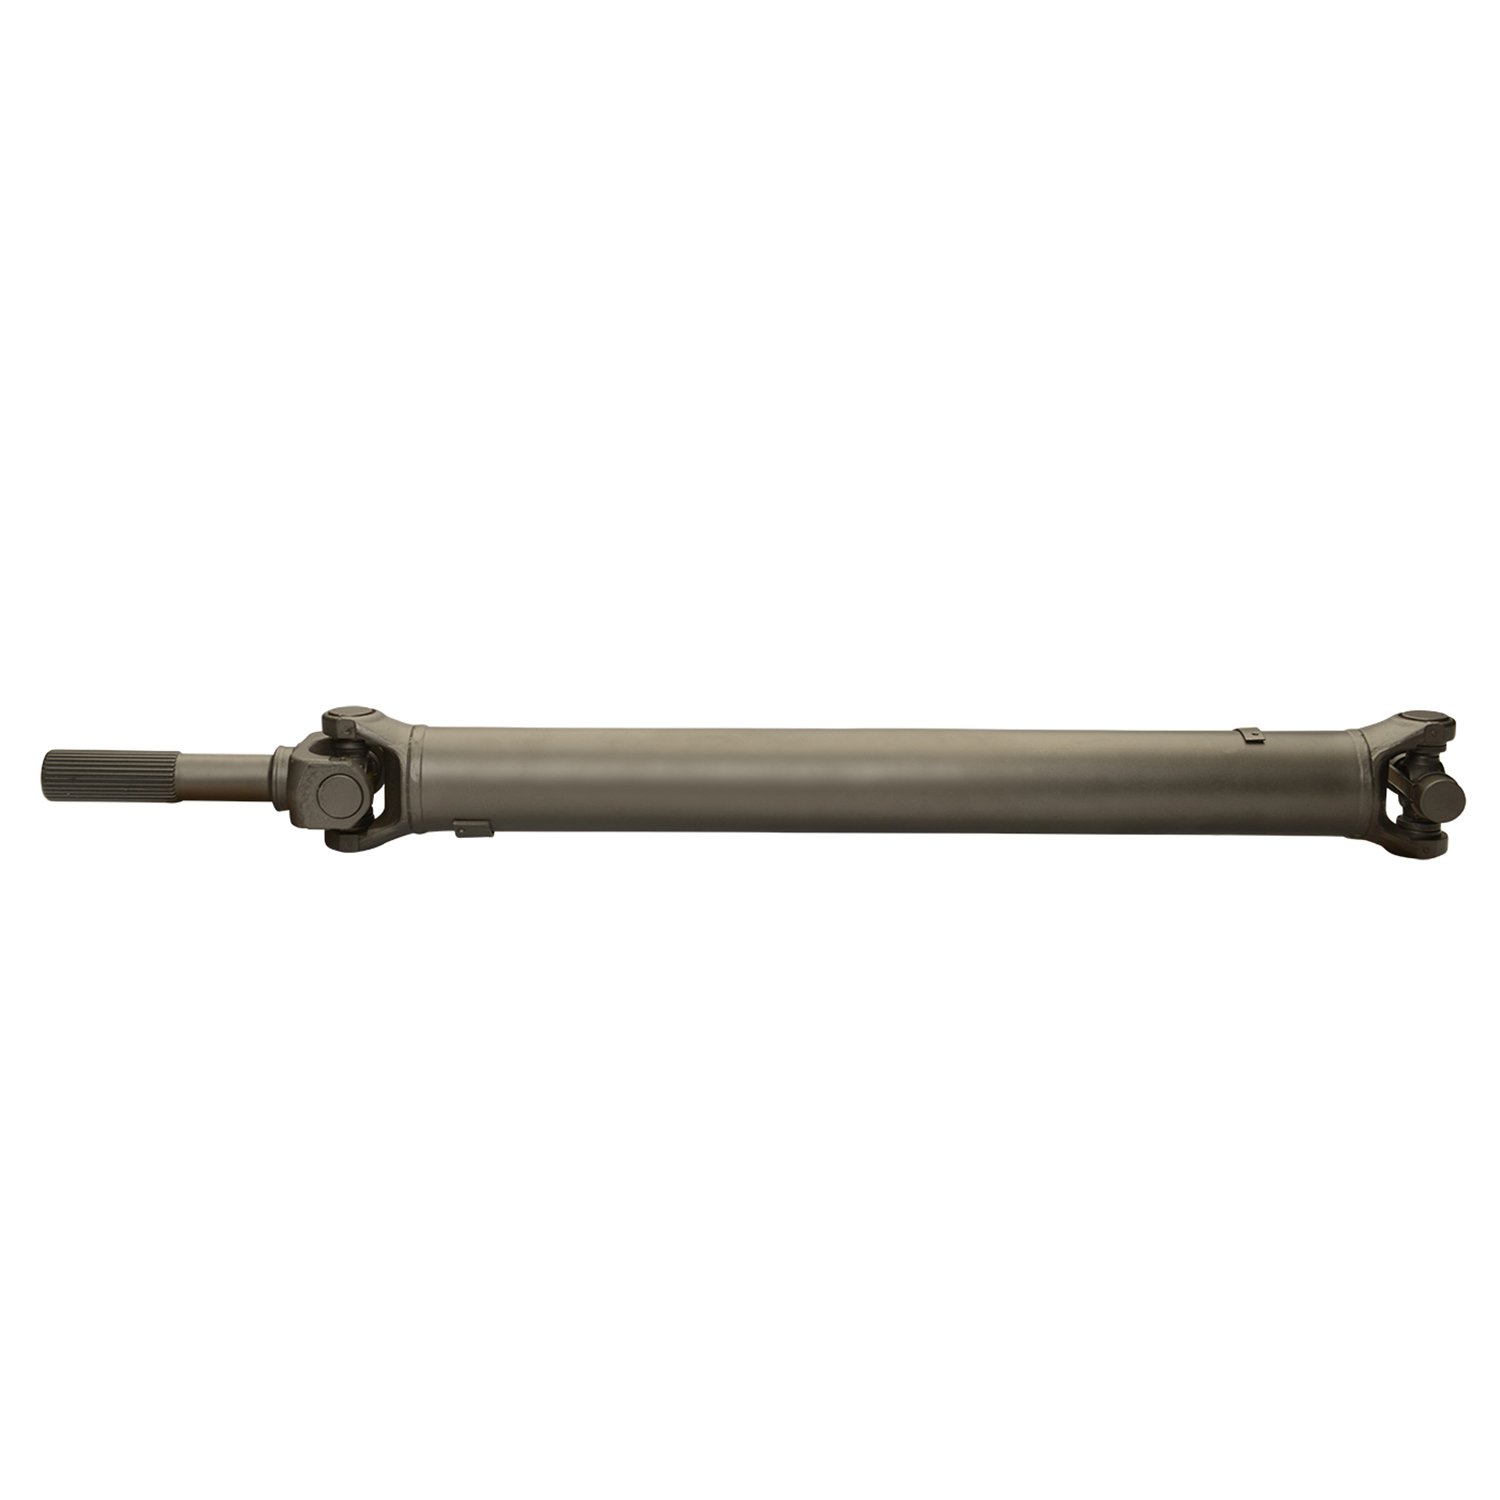 USA Standard ZDS9519 Front Driveshaft, For GM Truck & Suv, 25 in. Weld-To-Weld